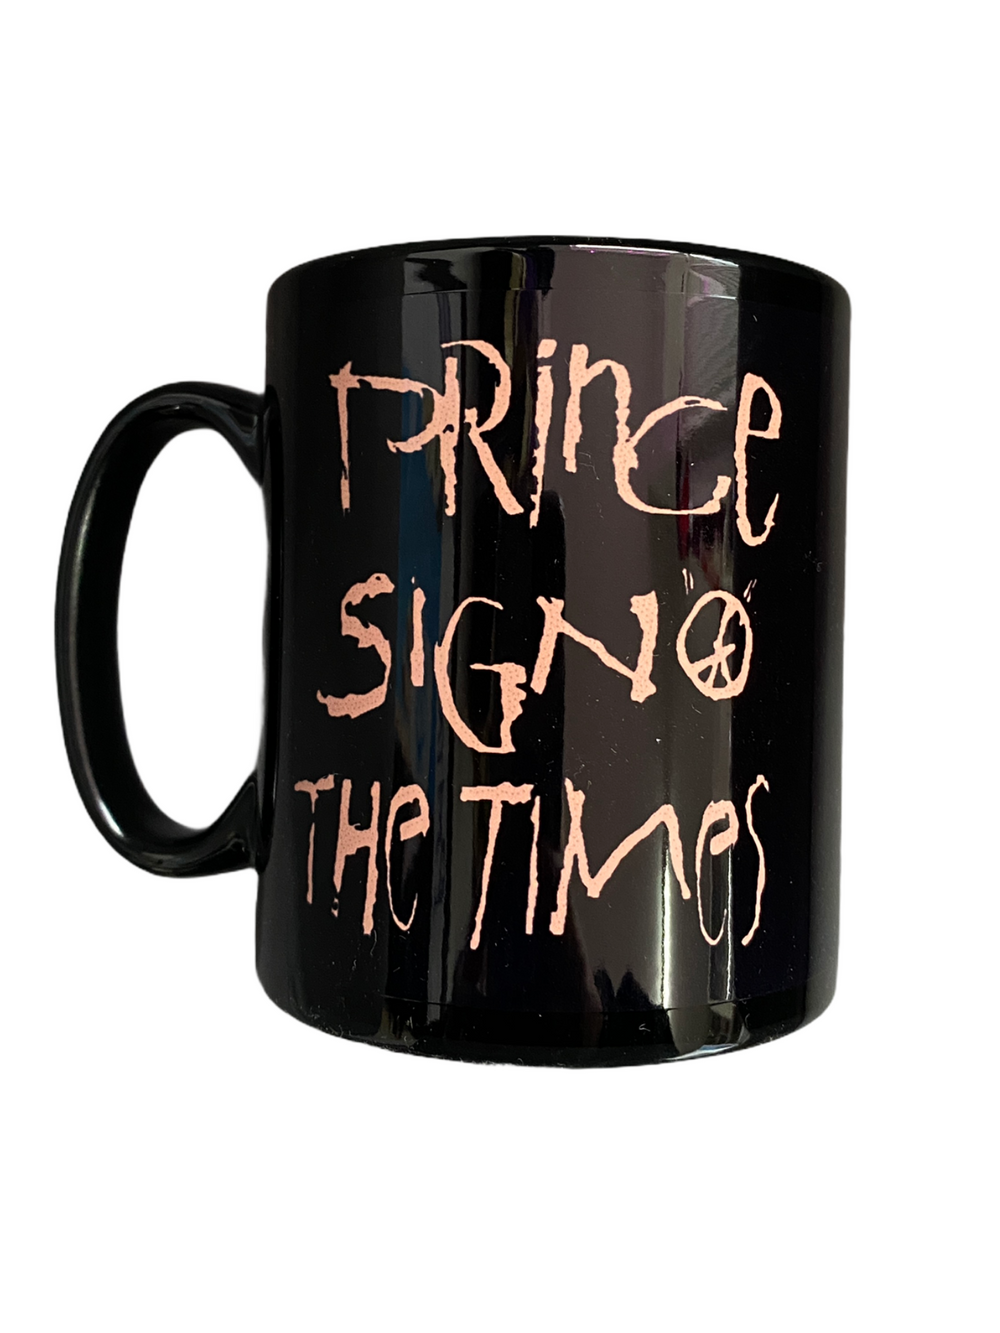 Prince – Sign O The Times Official Xclusive Licensed Limited Edition Mug Brand New IN STOCK